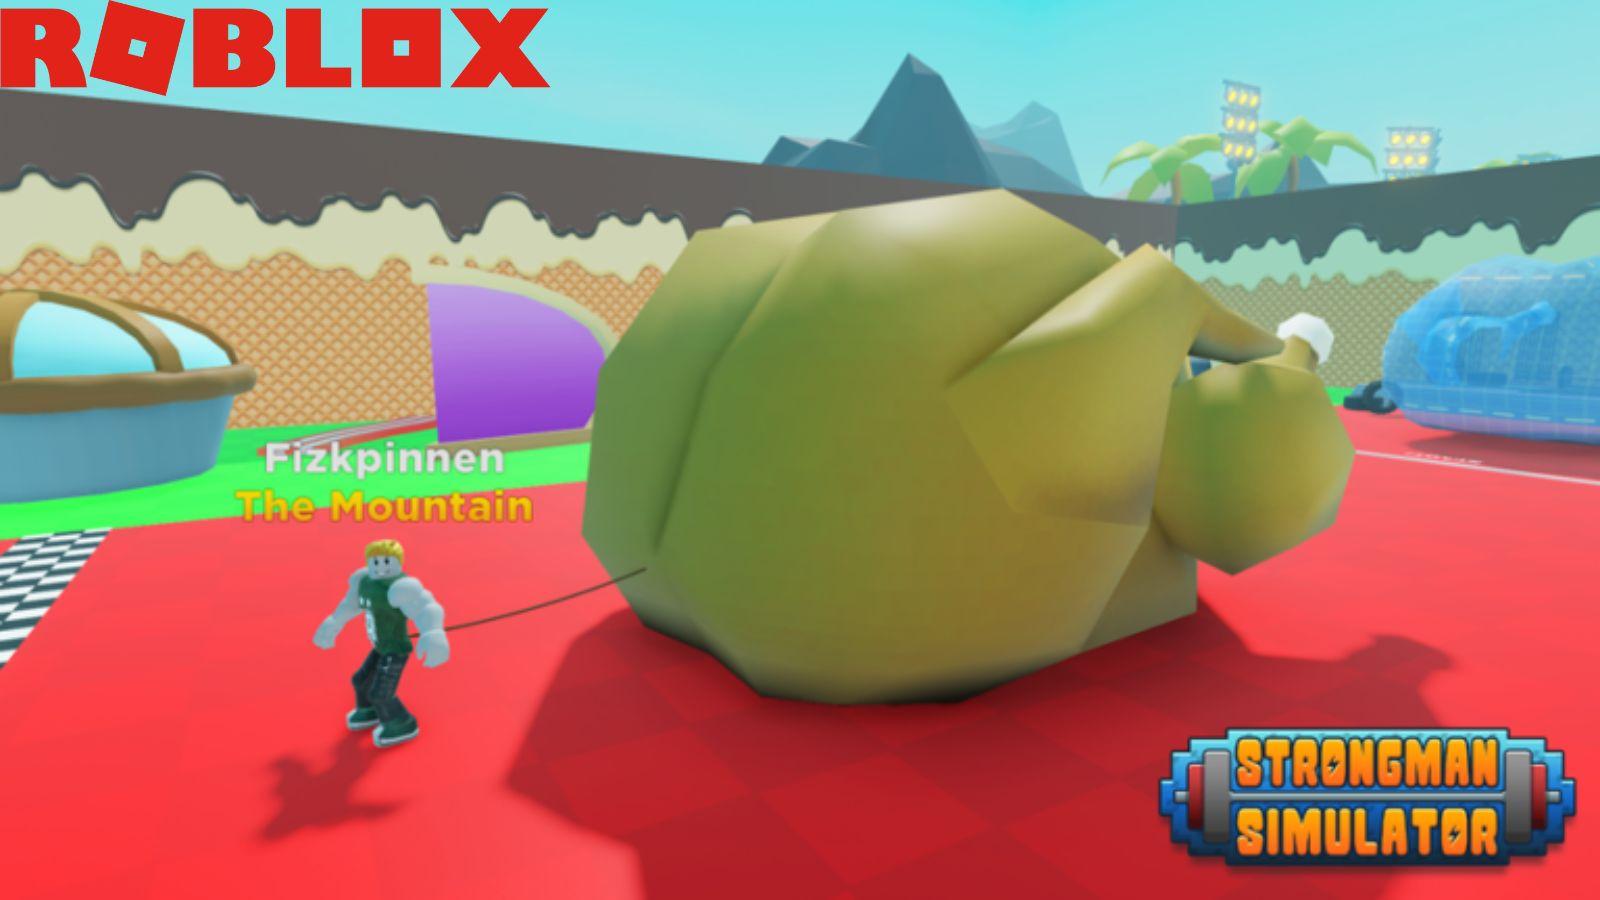 Pulling a chicken in Roblox